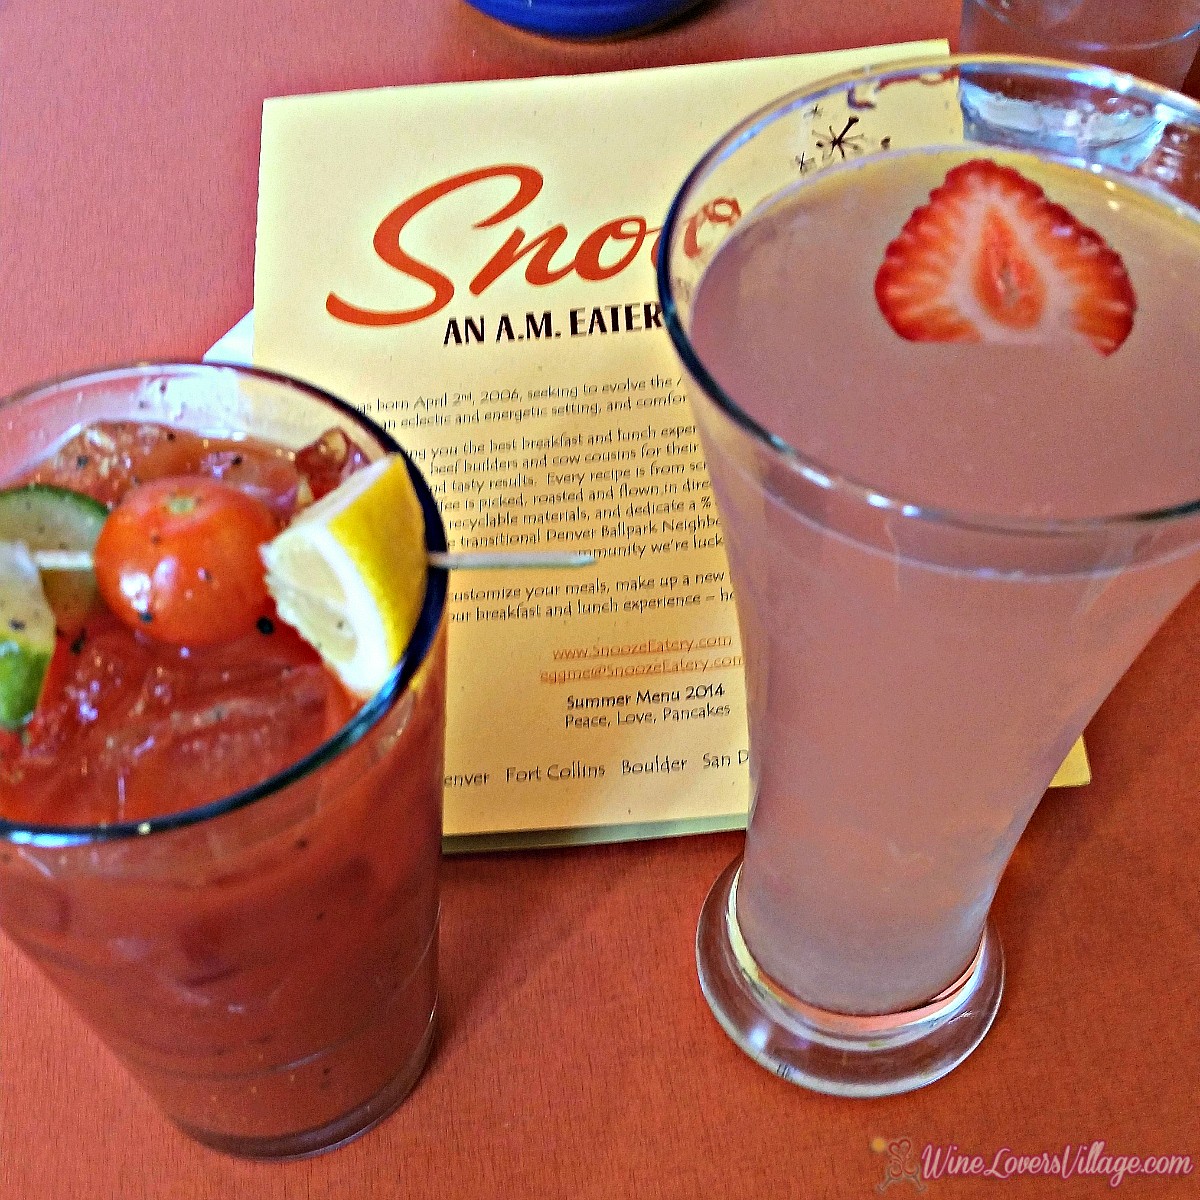 Denver tops the list for America's best cities for brunch, and these brunch cocktails at Snooze in Union Station Denver are worth the stop.